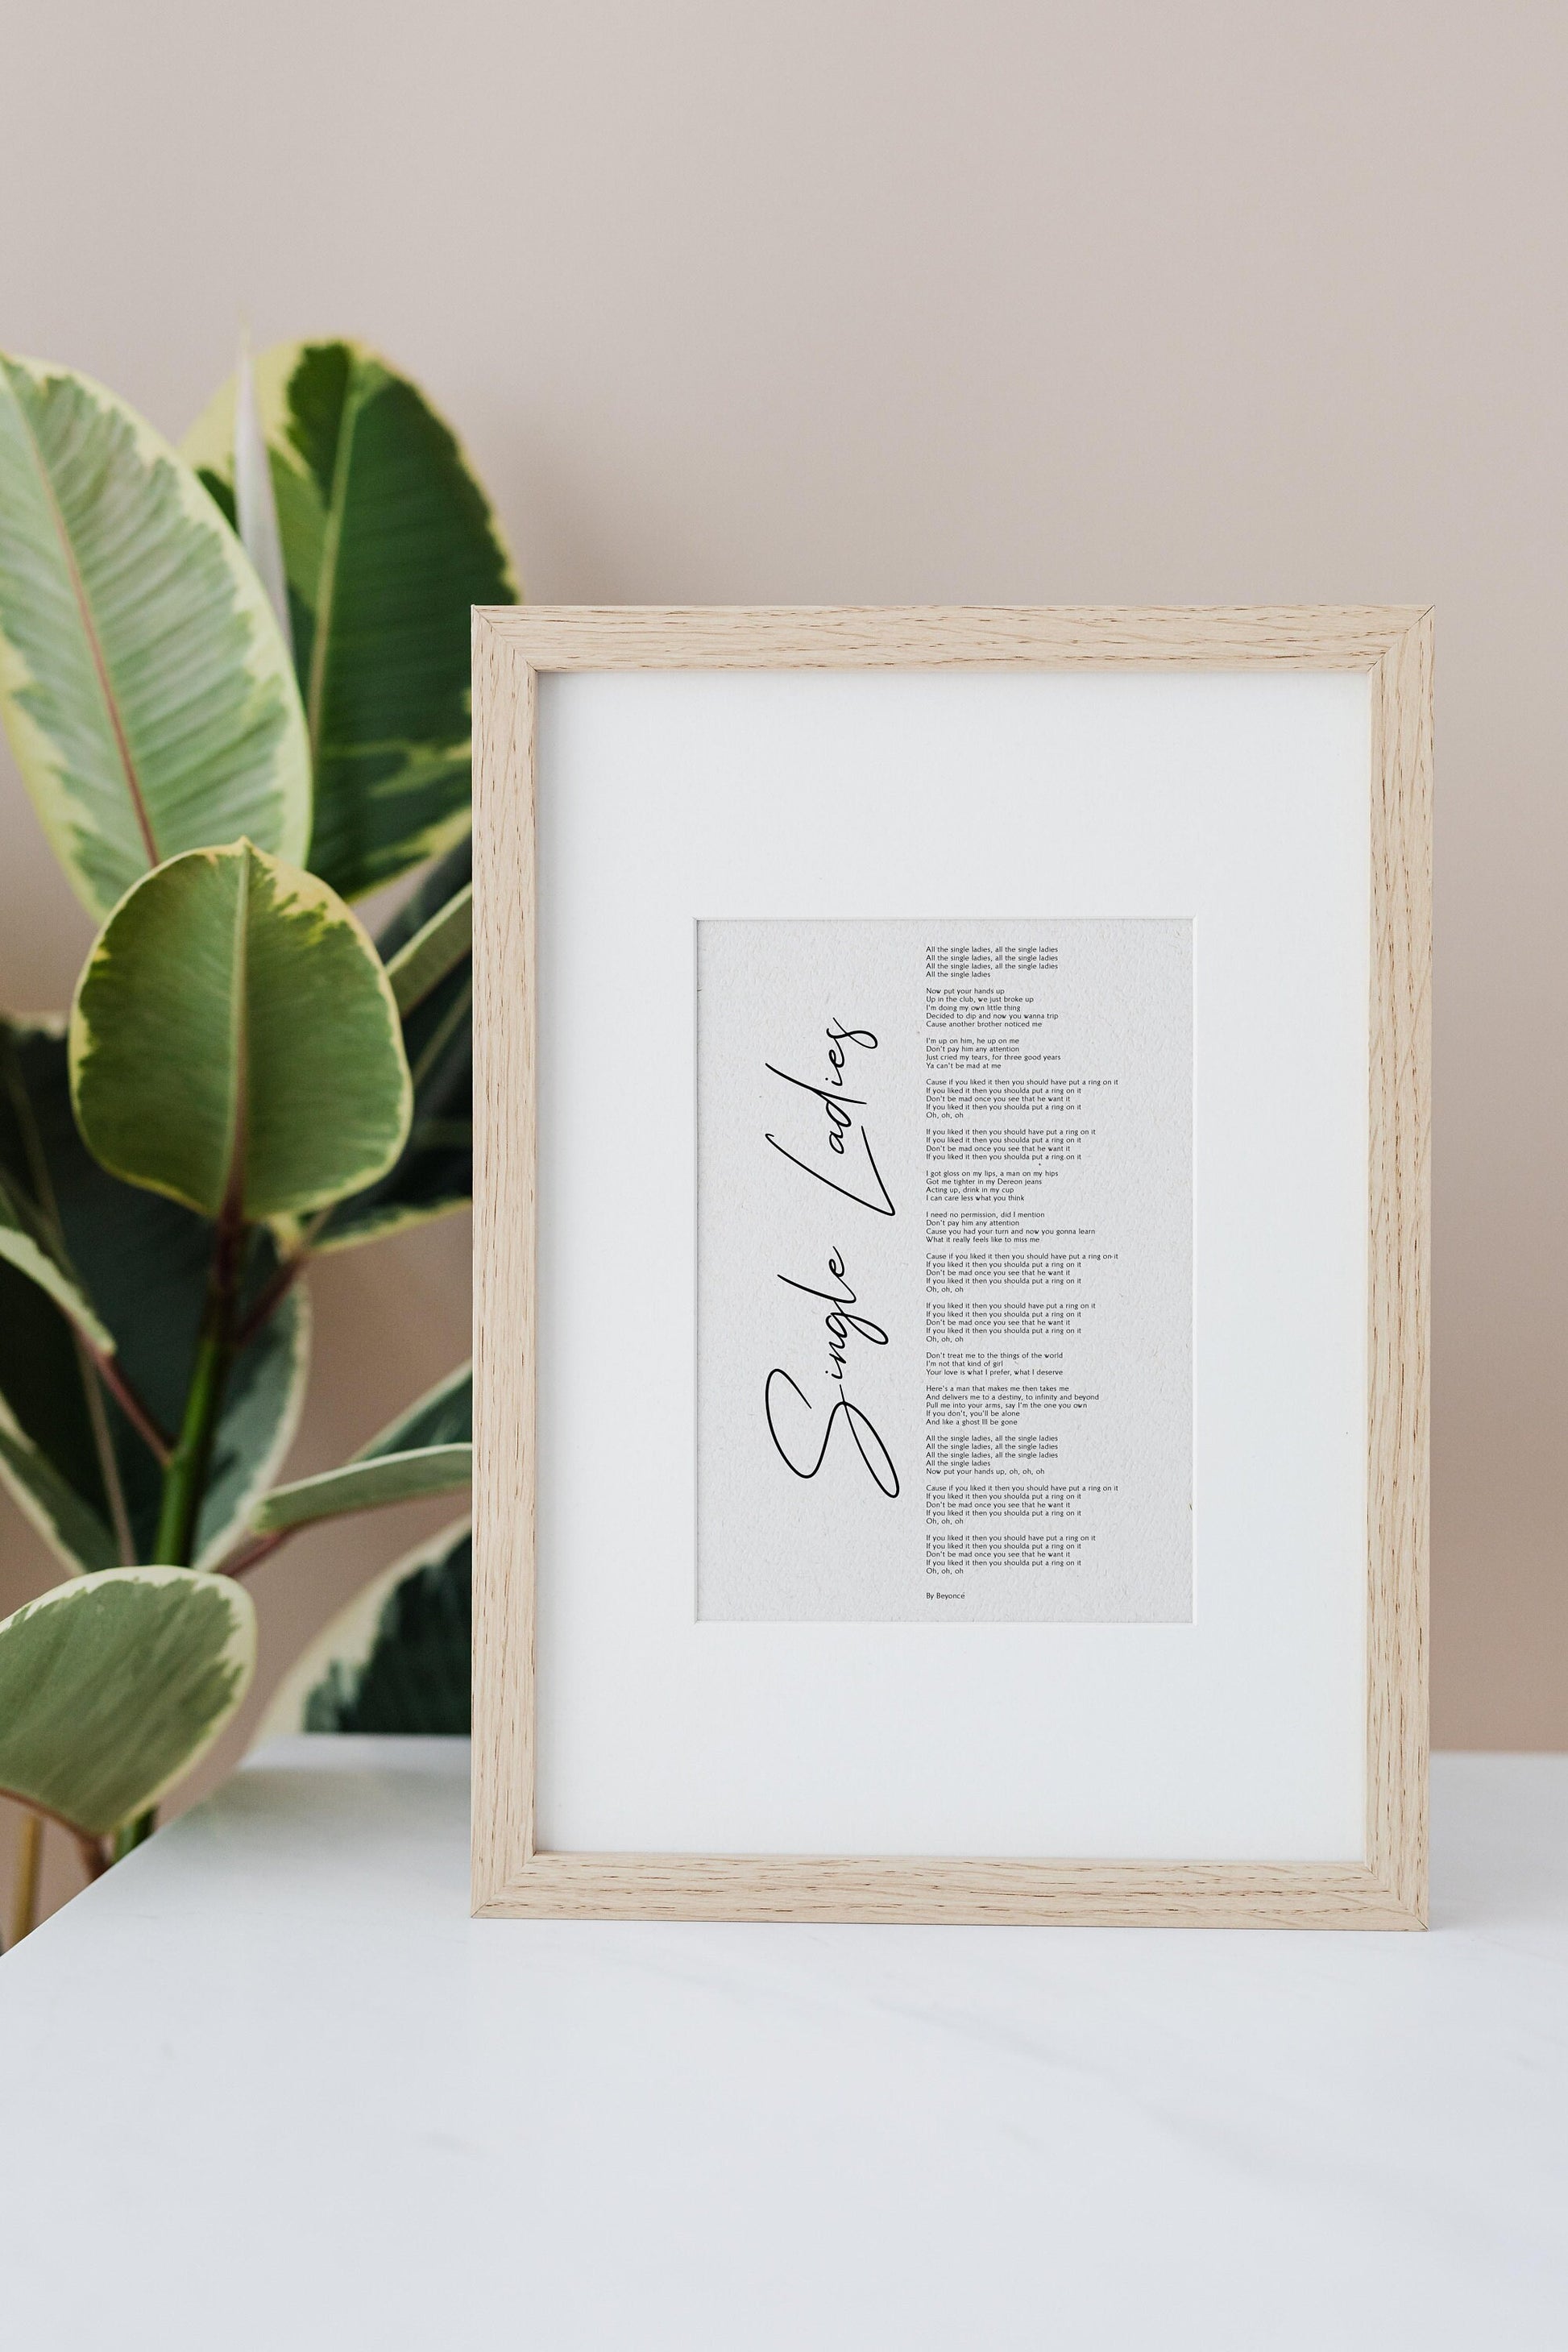 Single Ladies - Put a ring on it by Beyonce Print Framed - Beyonce Lyrics Print - Single Ladies Song Poster Print Framed - Put a ring on it